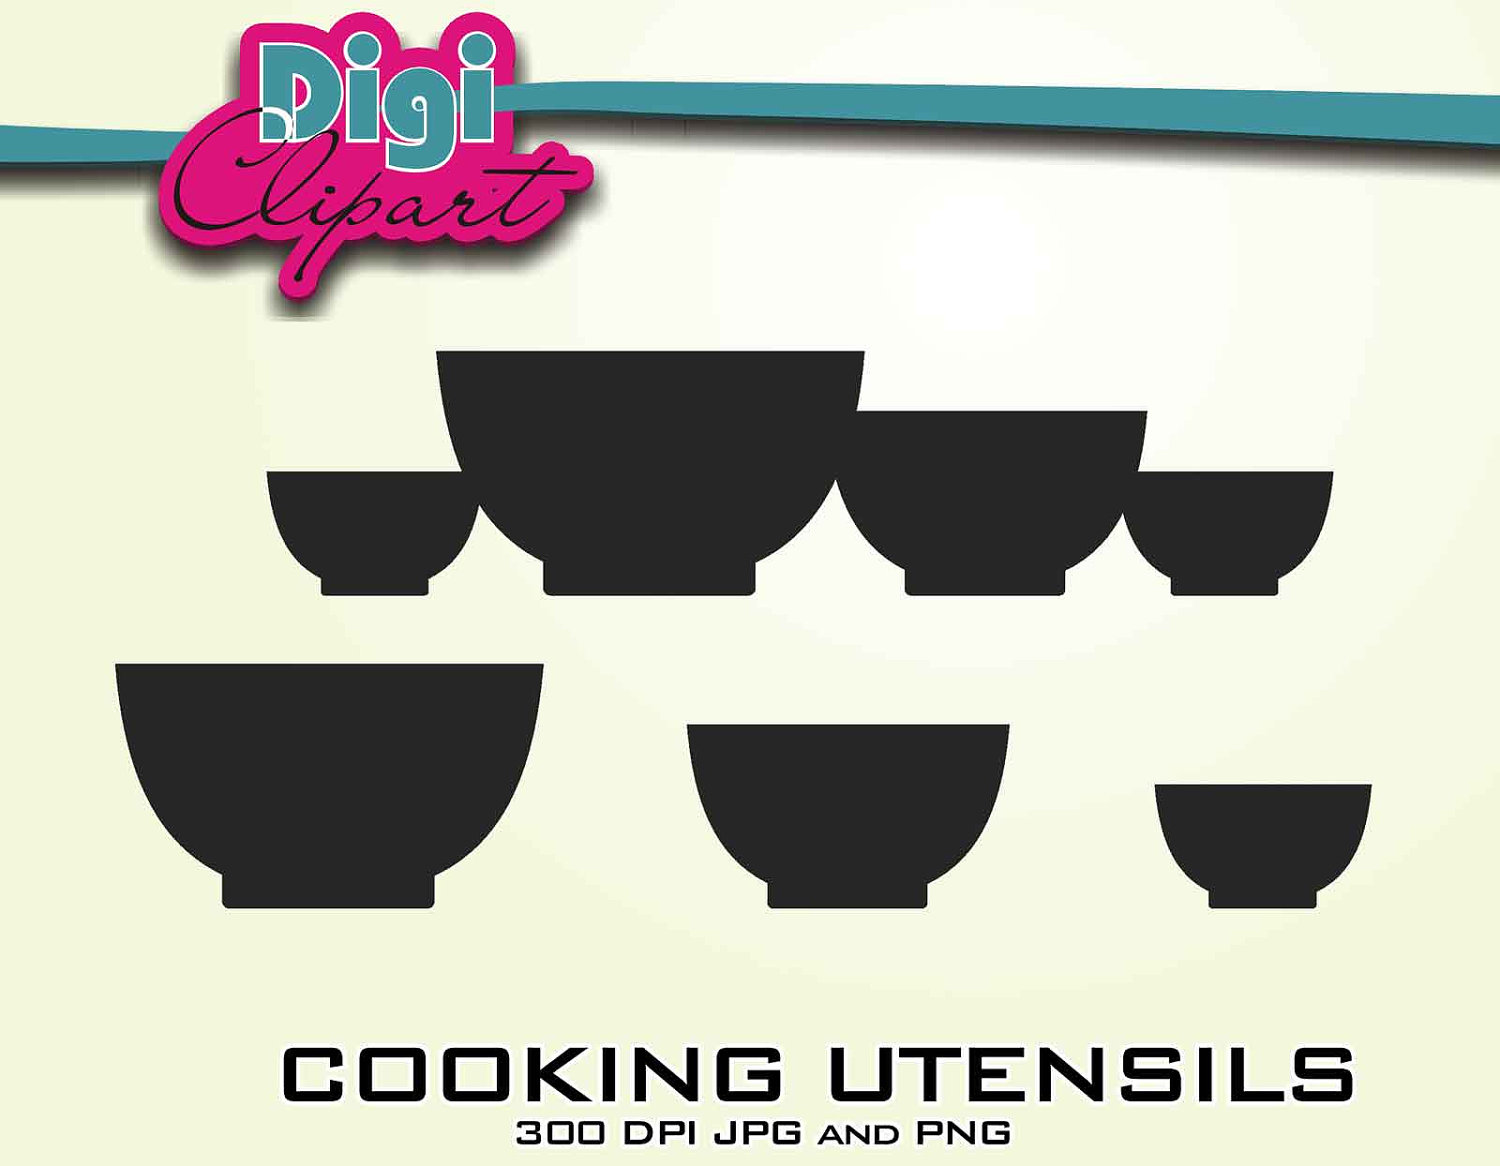 Mixing Cereal Bowl Silhouette Clip Art by digifotosclipart 